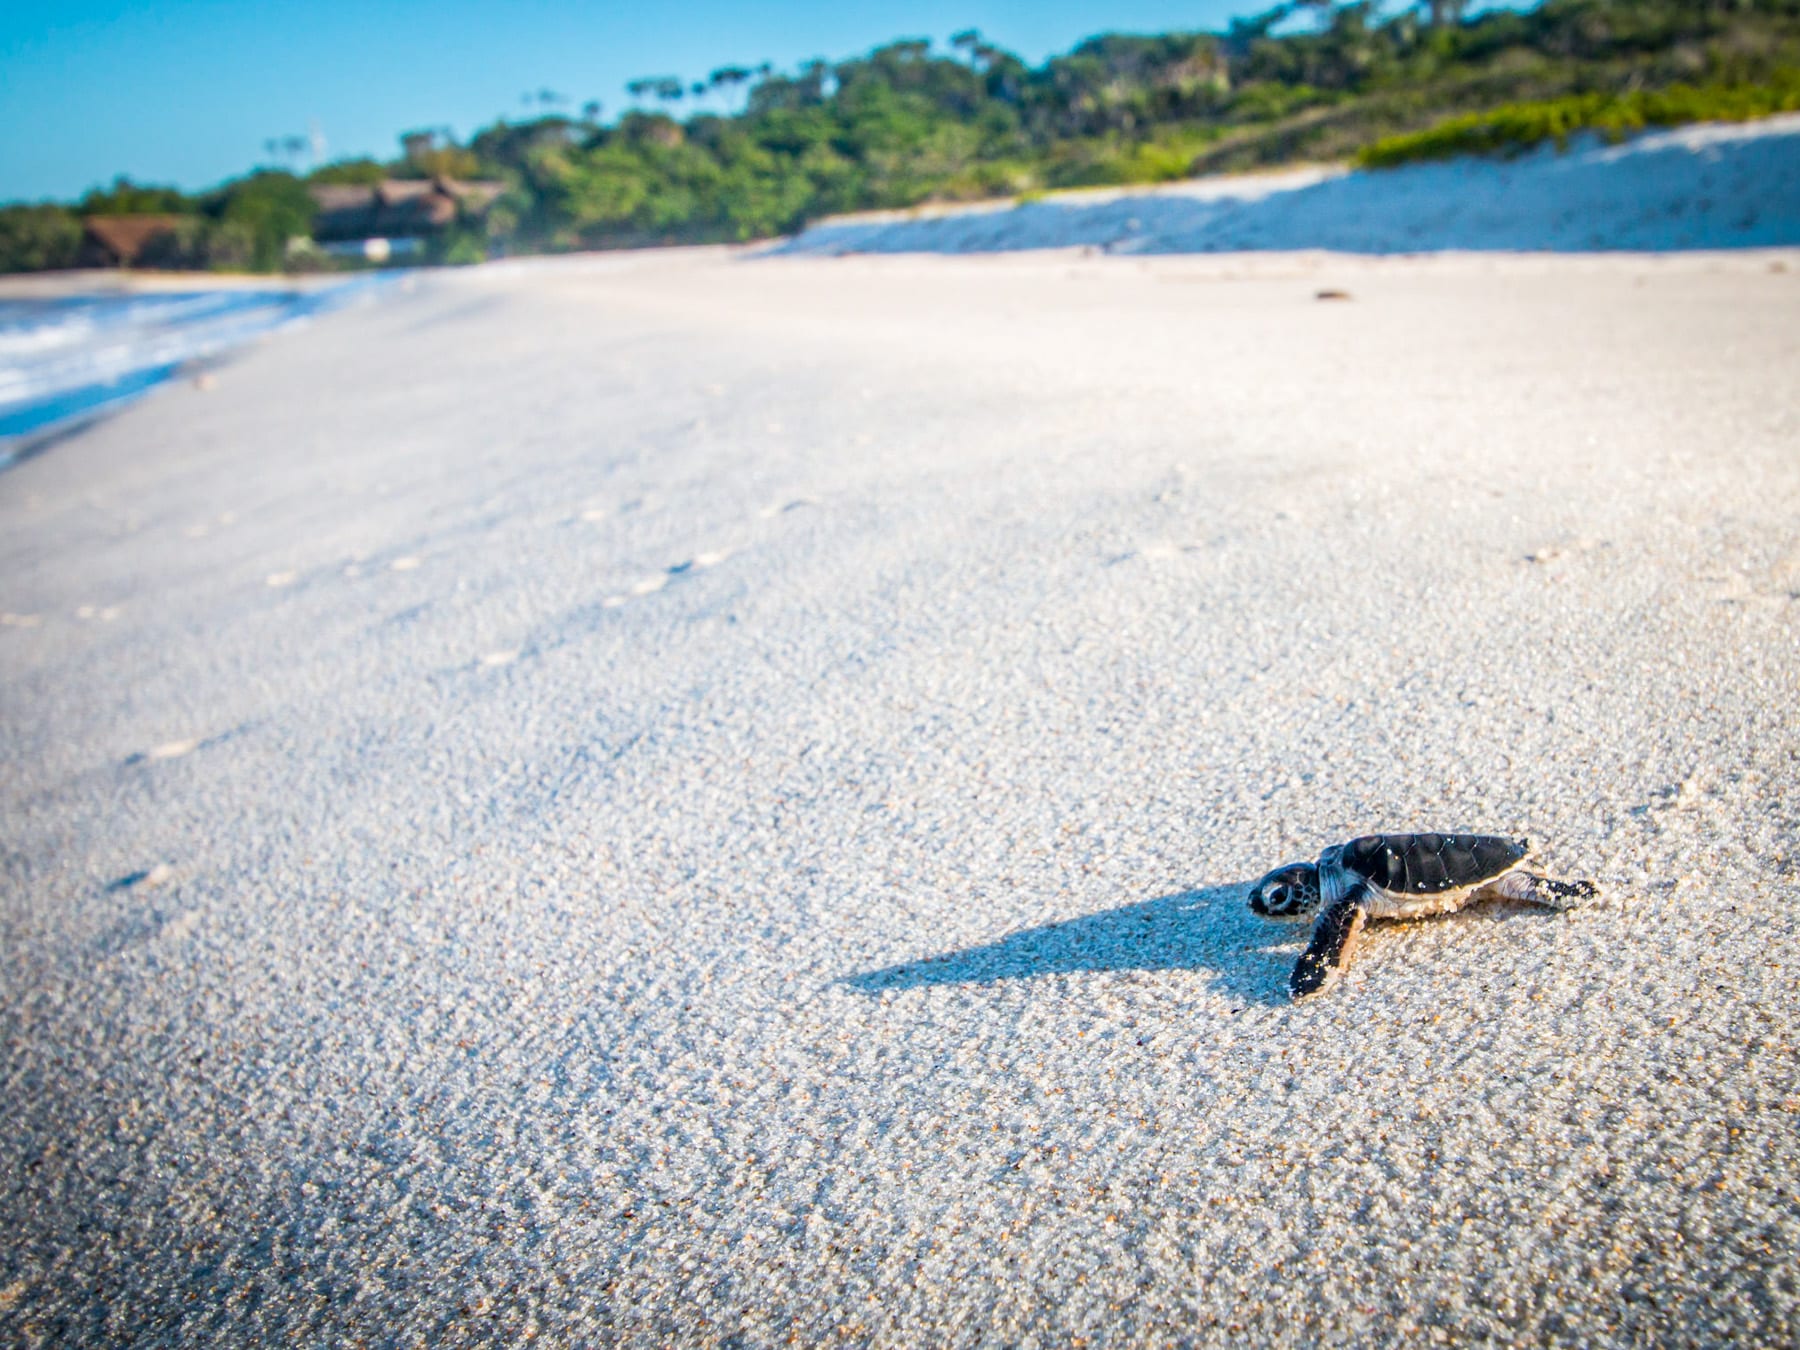 A baby turtle makes its way to the ocean after hatching.